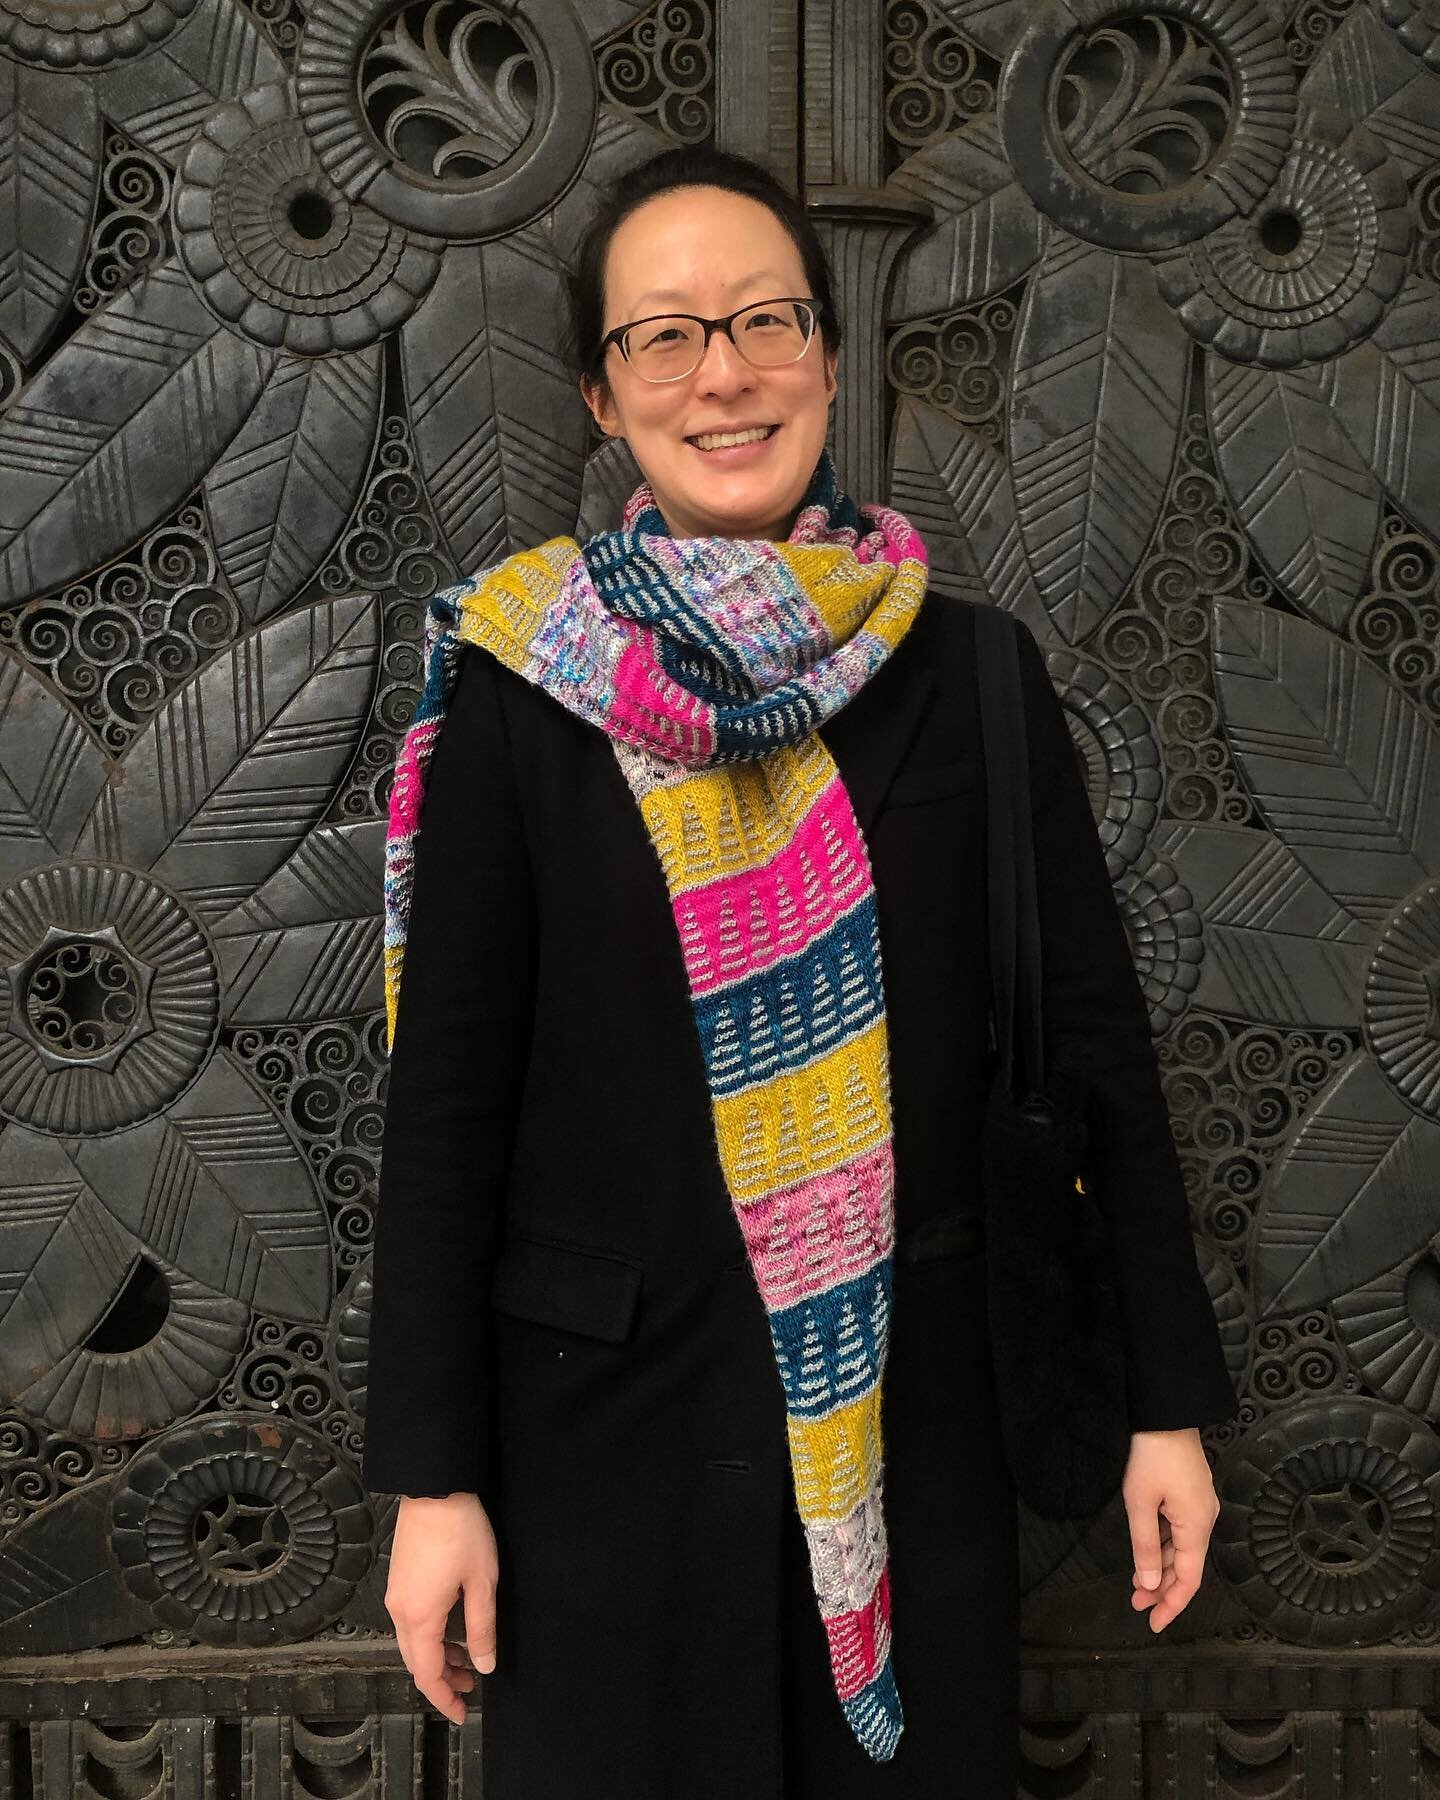 I knit this oversized scarf and have been wearing it with my long winter coat. The colorful yarn came bundled in one &ldquo;Mixed Lot of Leftover Yarn&rdquo; bag from eBay, and I like to think that someone out there is wearing a scarf in the same col